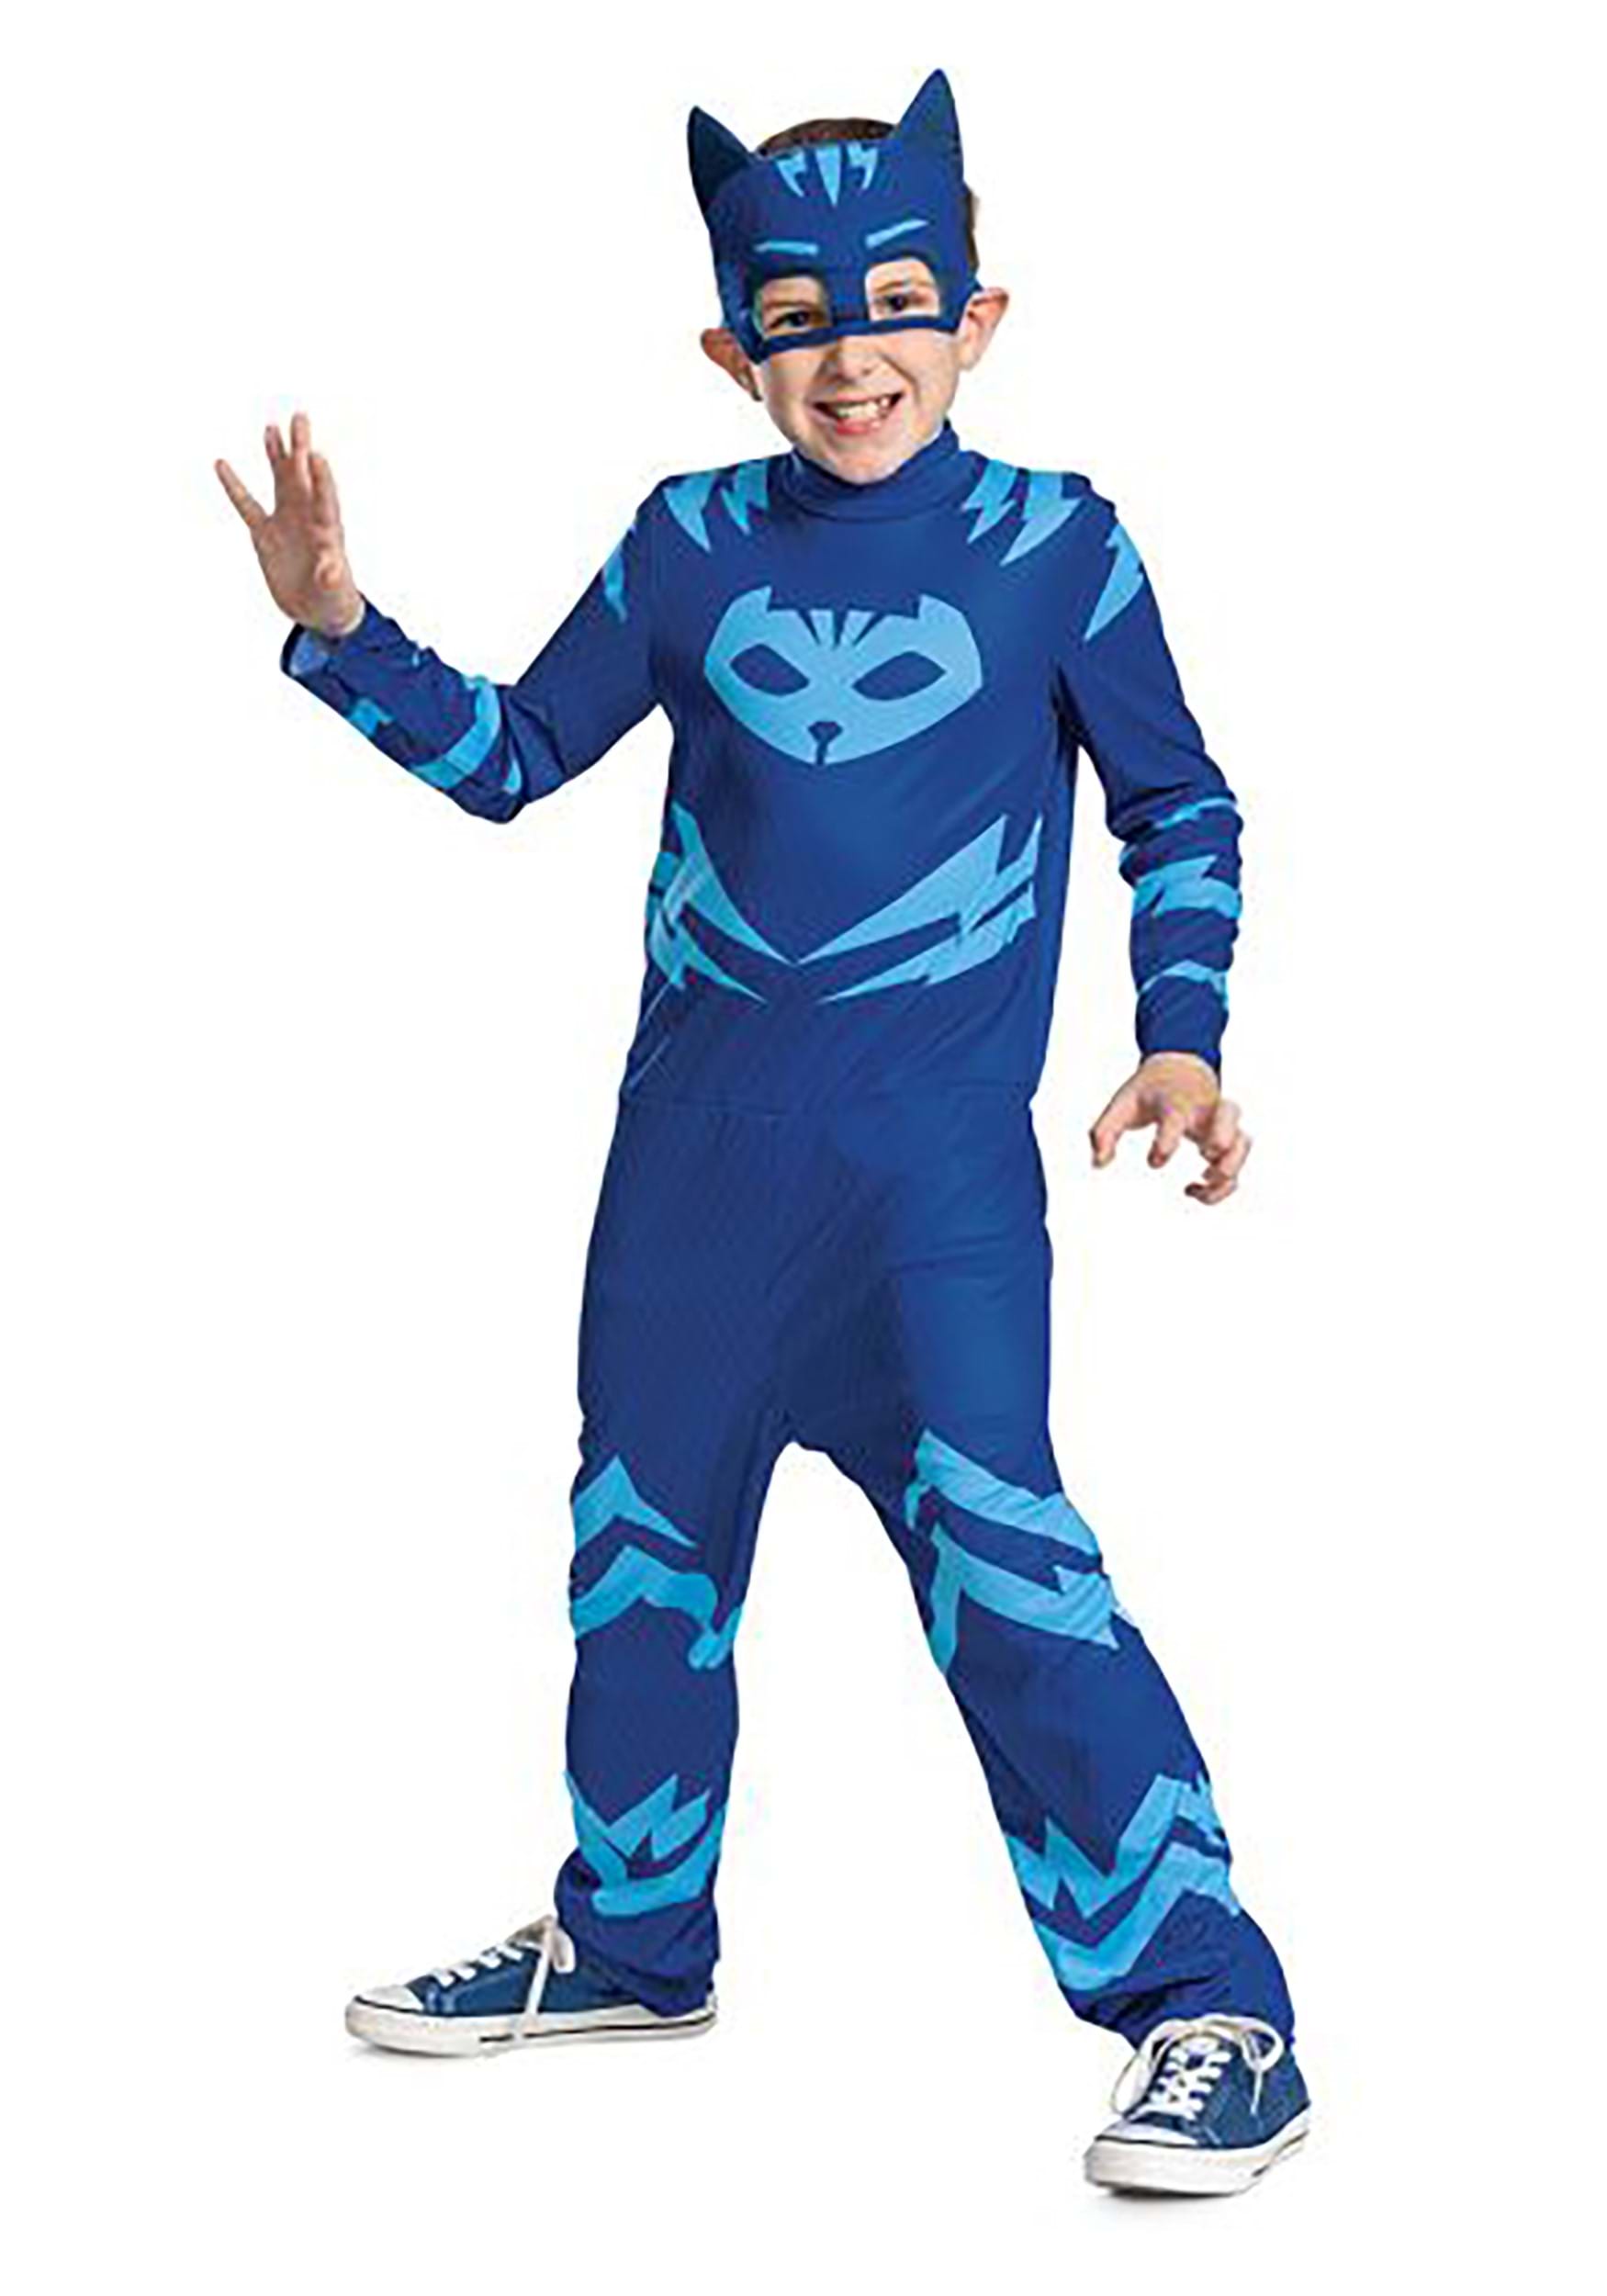 Photos - Fancy Dress PJ Masks Disguise  Catboy Adaptive Costume for Toddlers | Catboy Costume Bl 